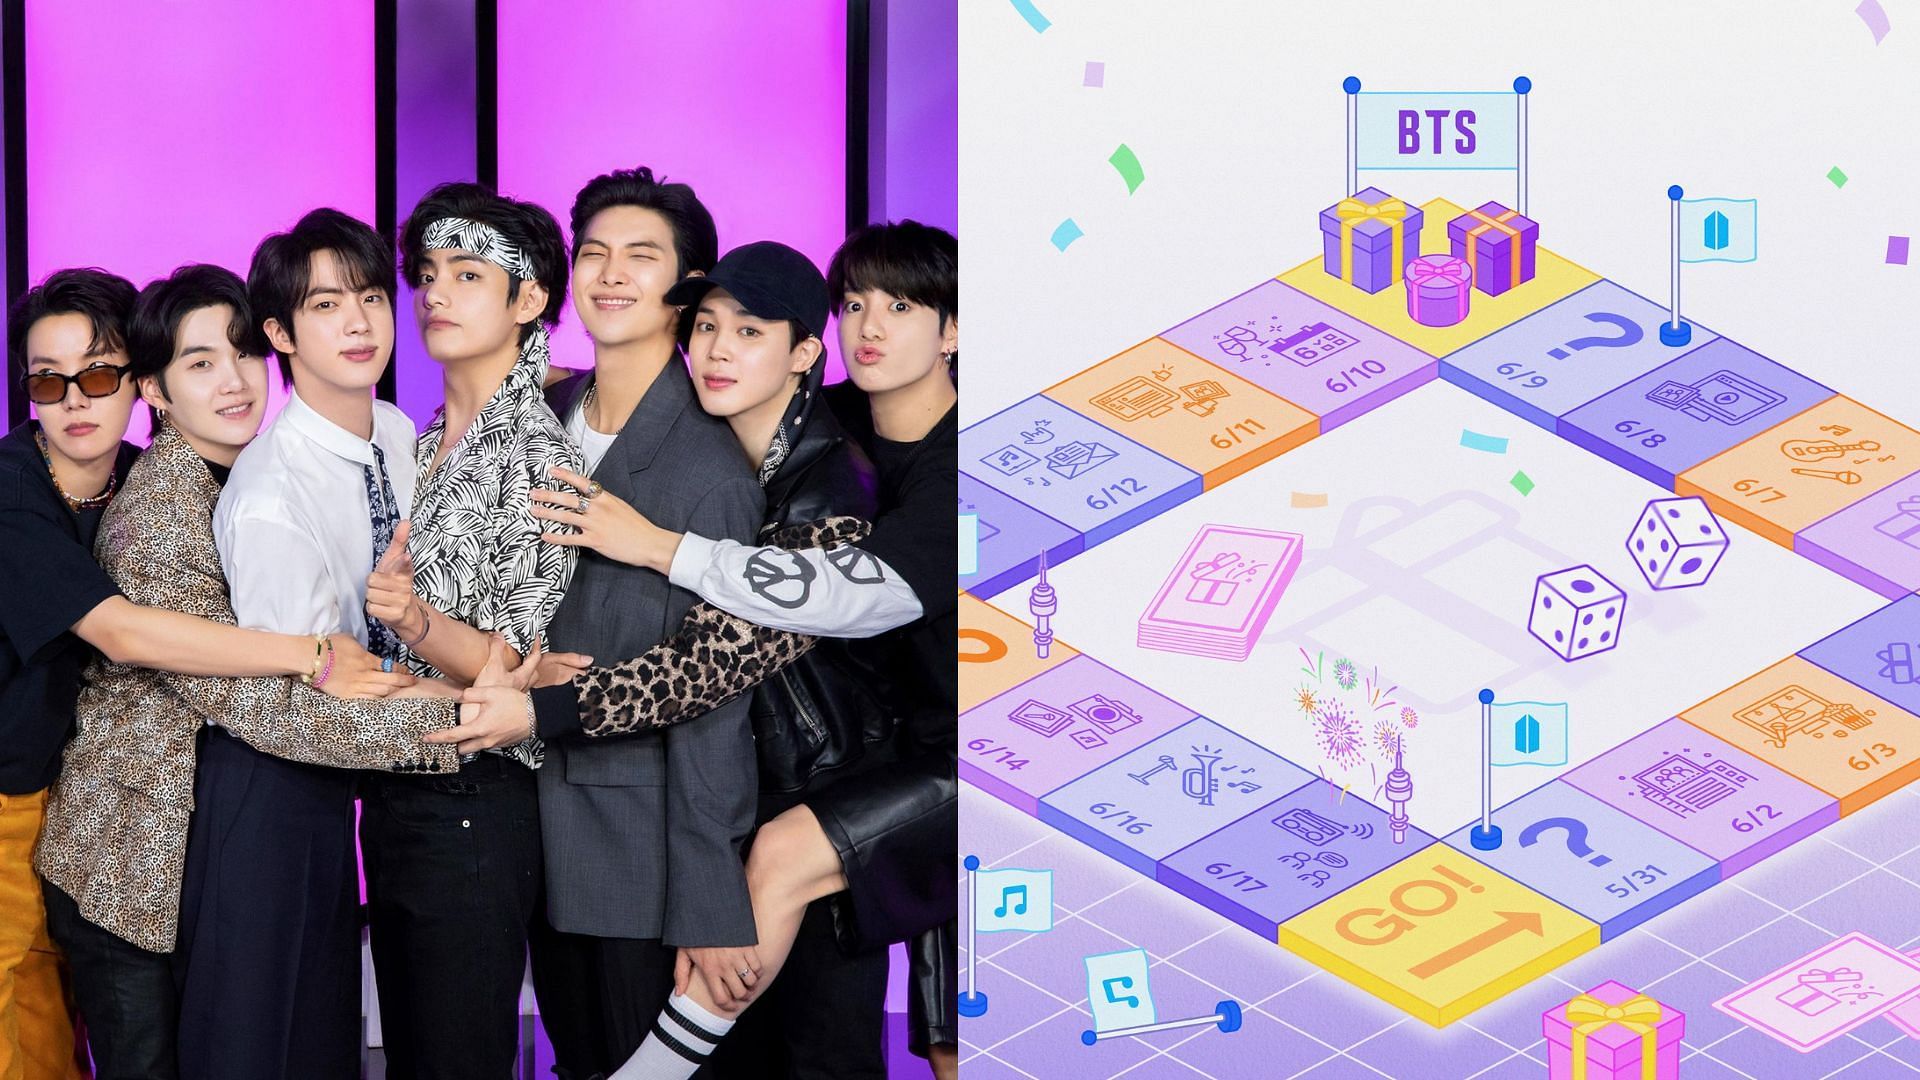 BTS Festa 2023 Schedule for the group’s 10th anniversary revealed